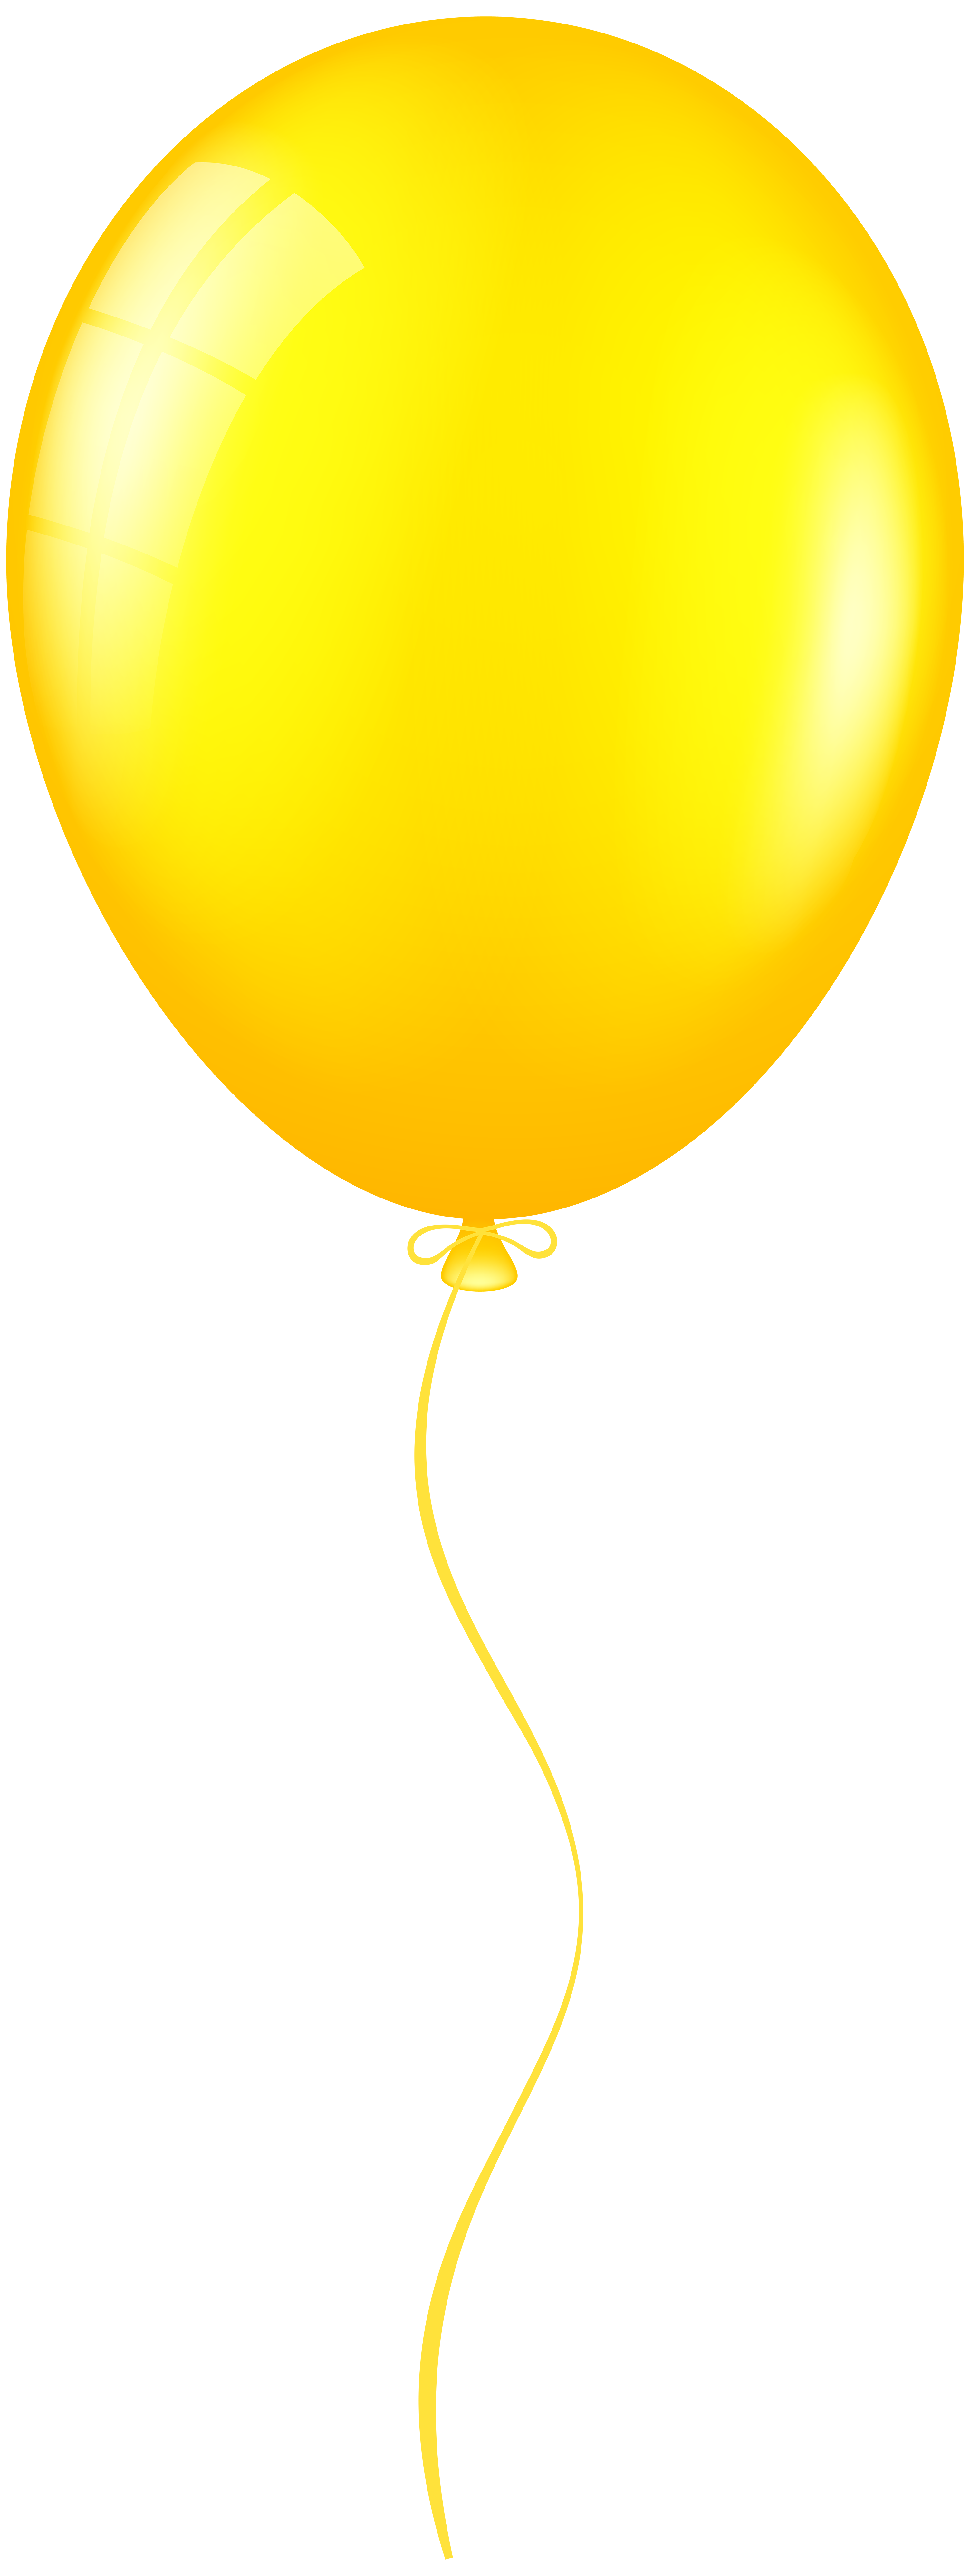 Balloons Clipart Free | Free download on ClipArtMag